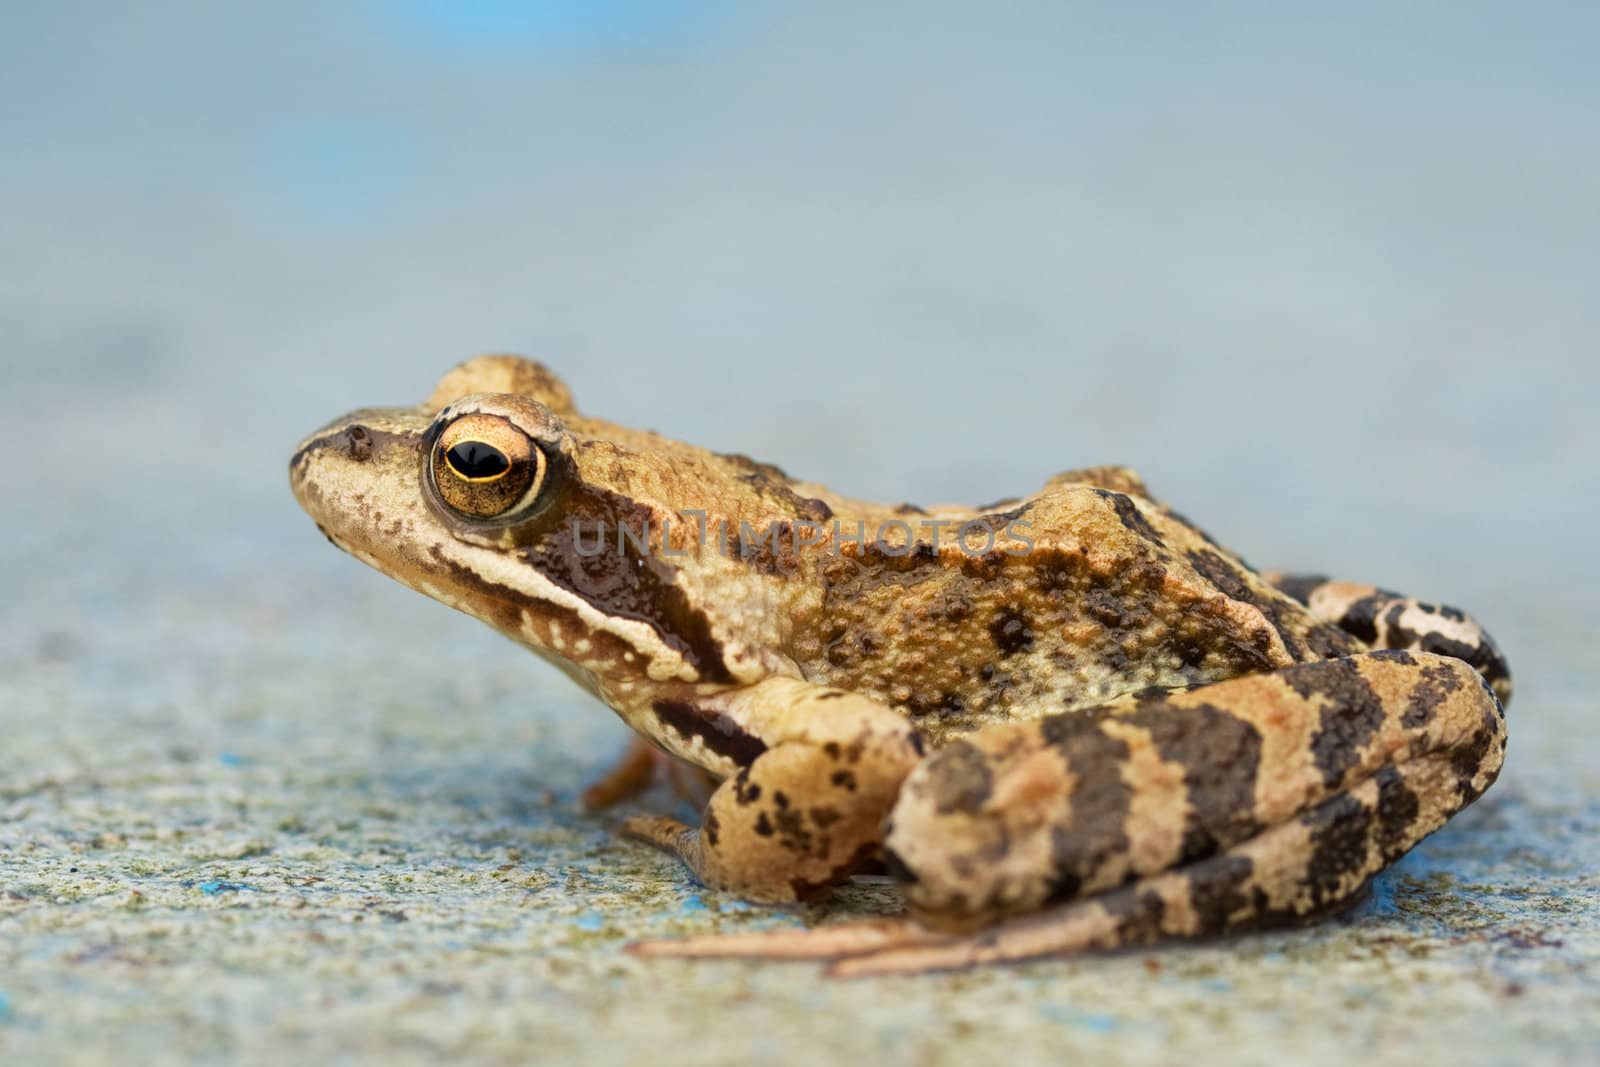 Young wet toad sitting on the concrete